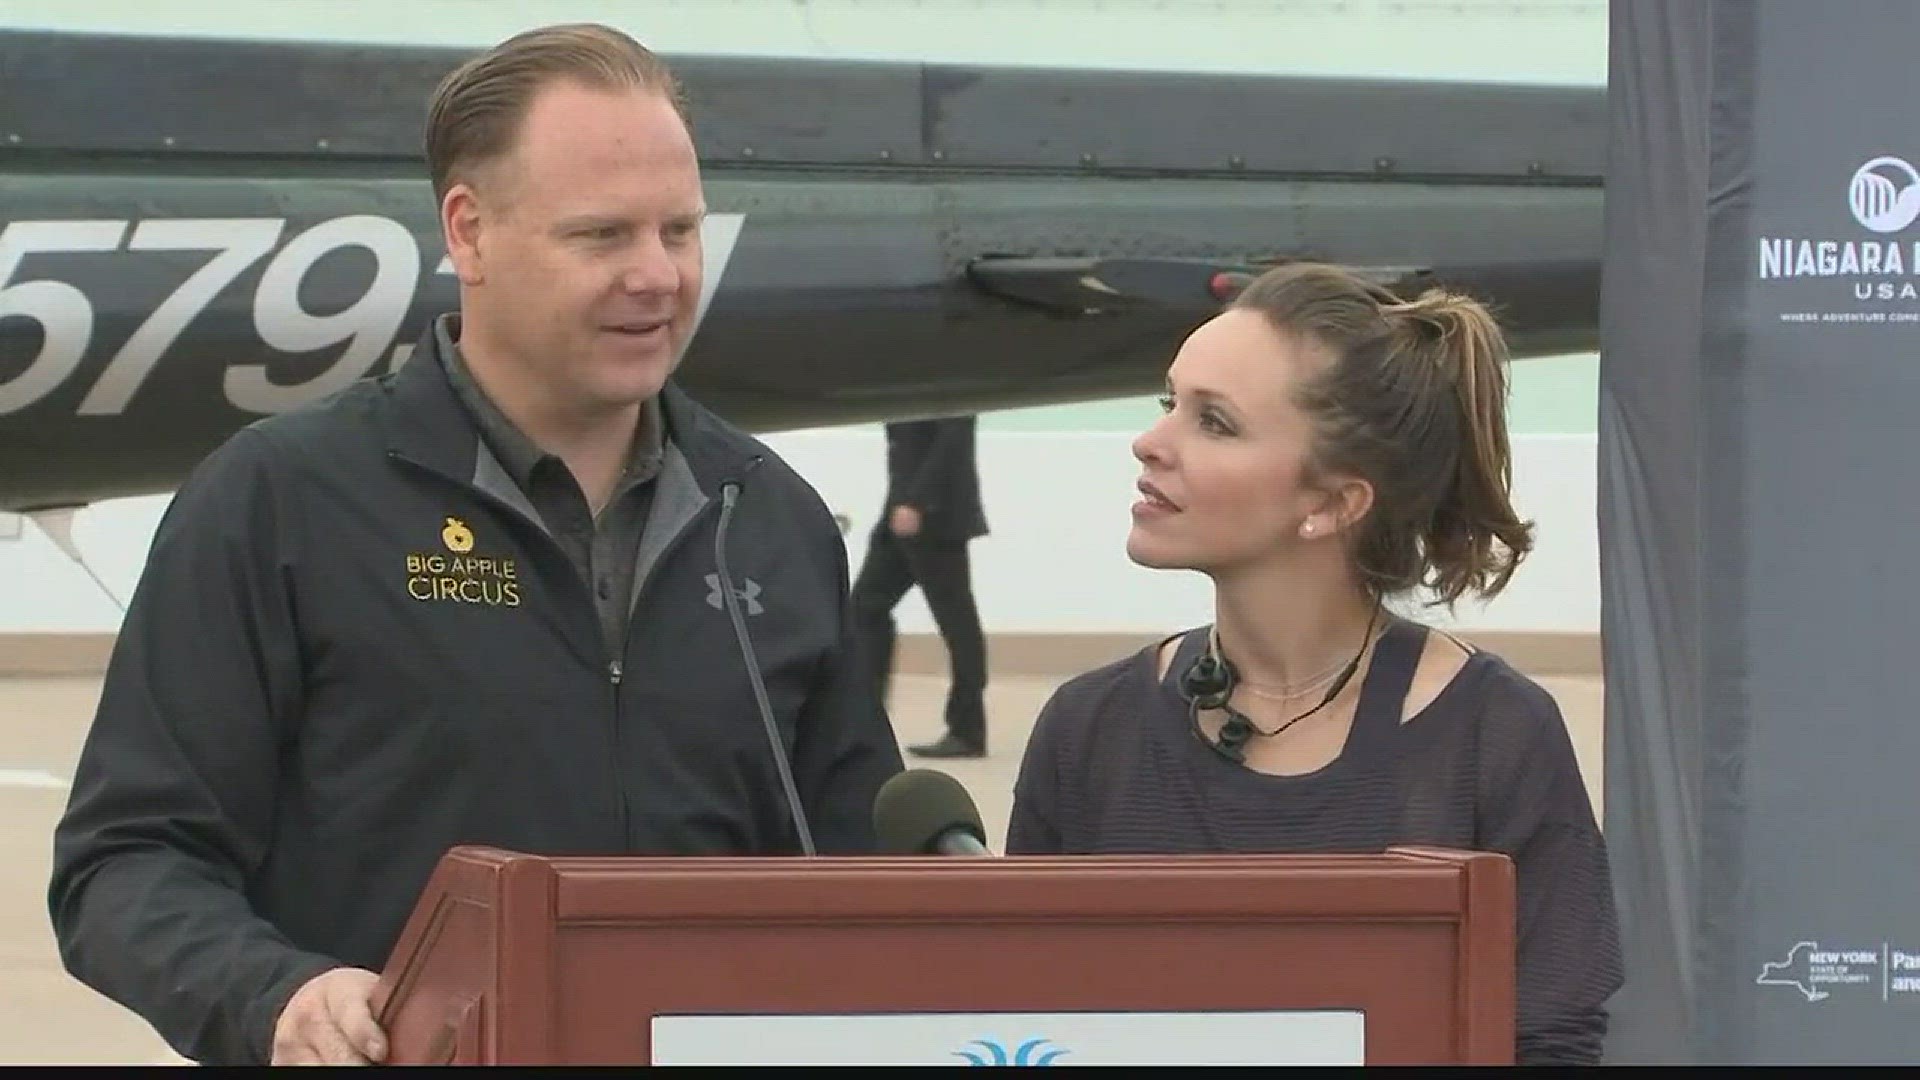 Check out Channel 2's coverage of Erendira Wallenda's daring stunt.